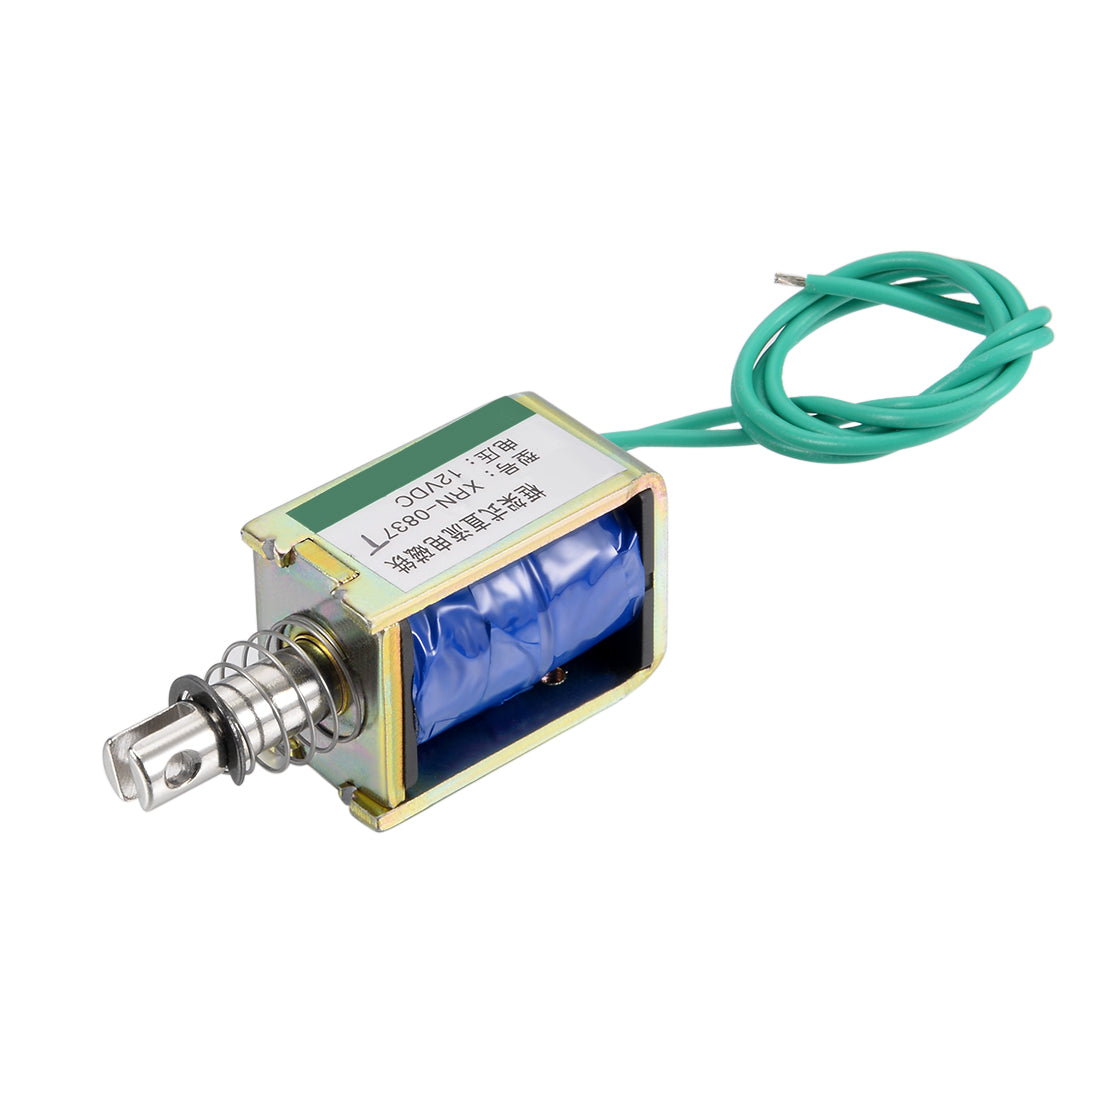 uxcell Uxcell XRN-0837T DC 12V 15N 10mm Push Pull Type Open Frame Solenoid Electromagnet